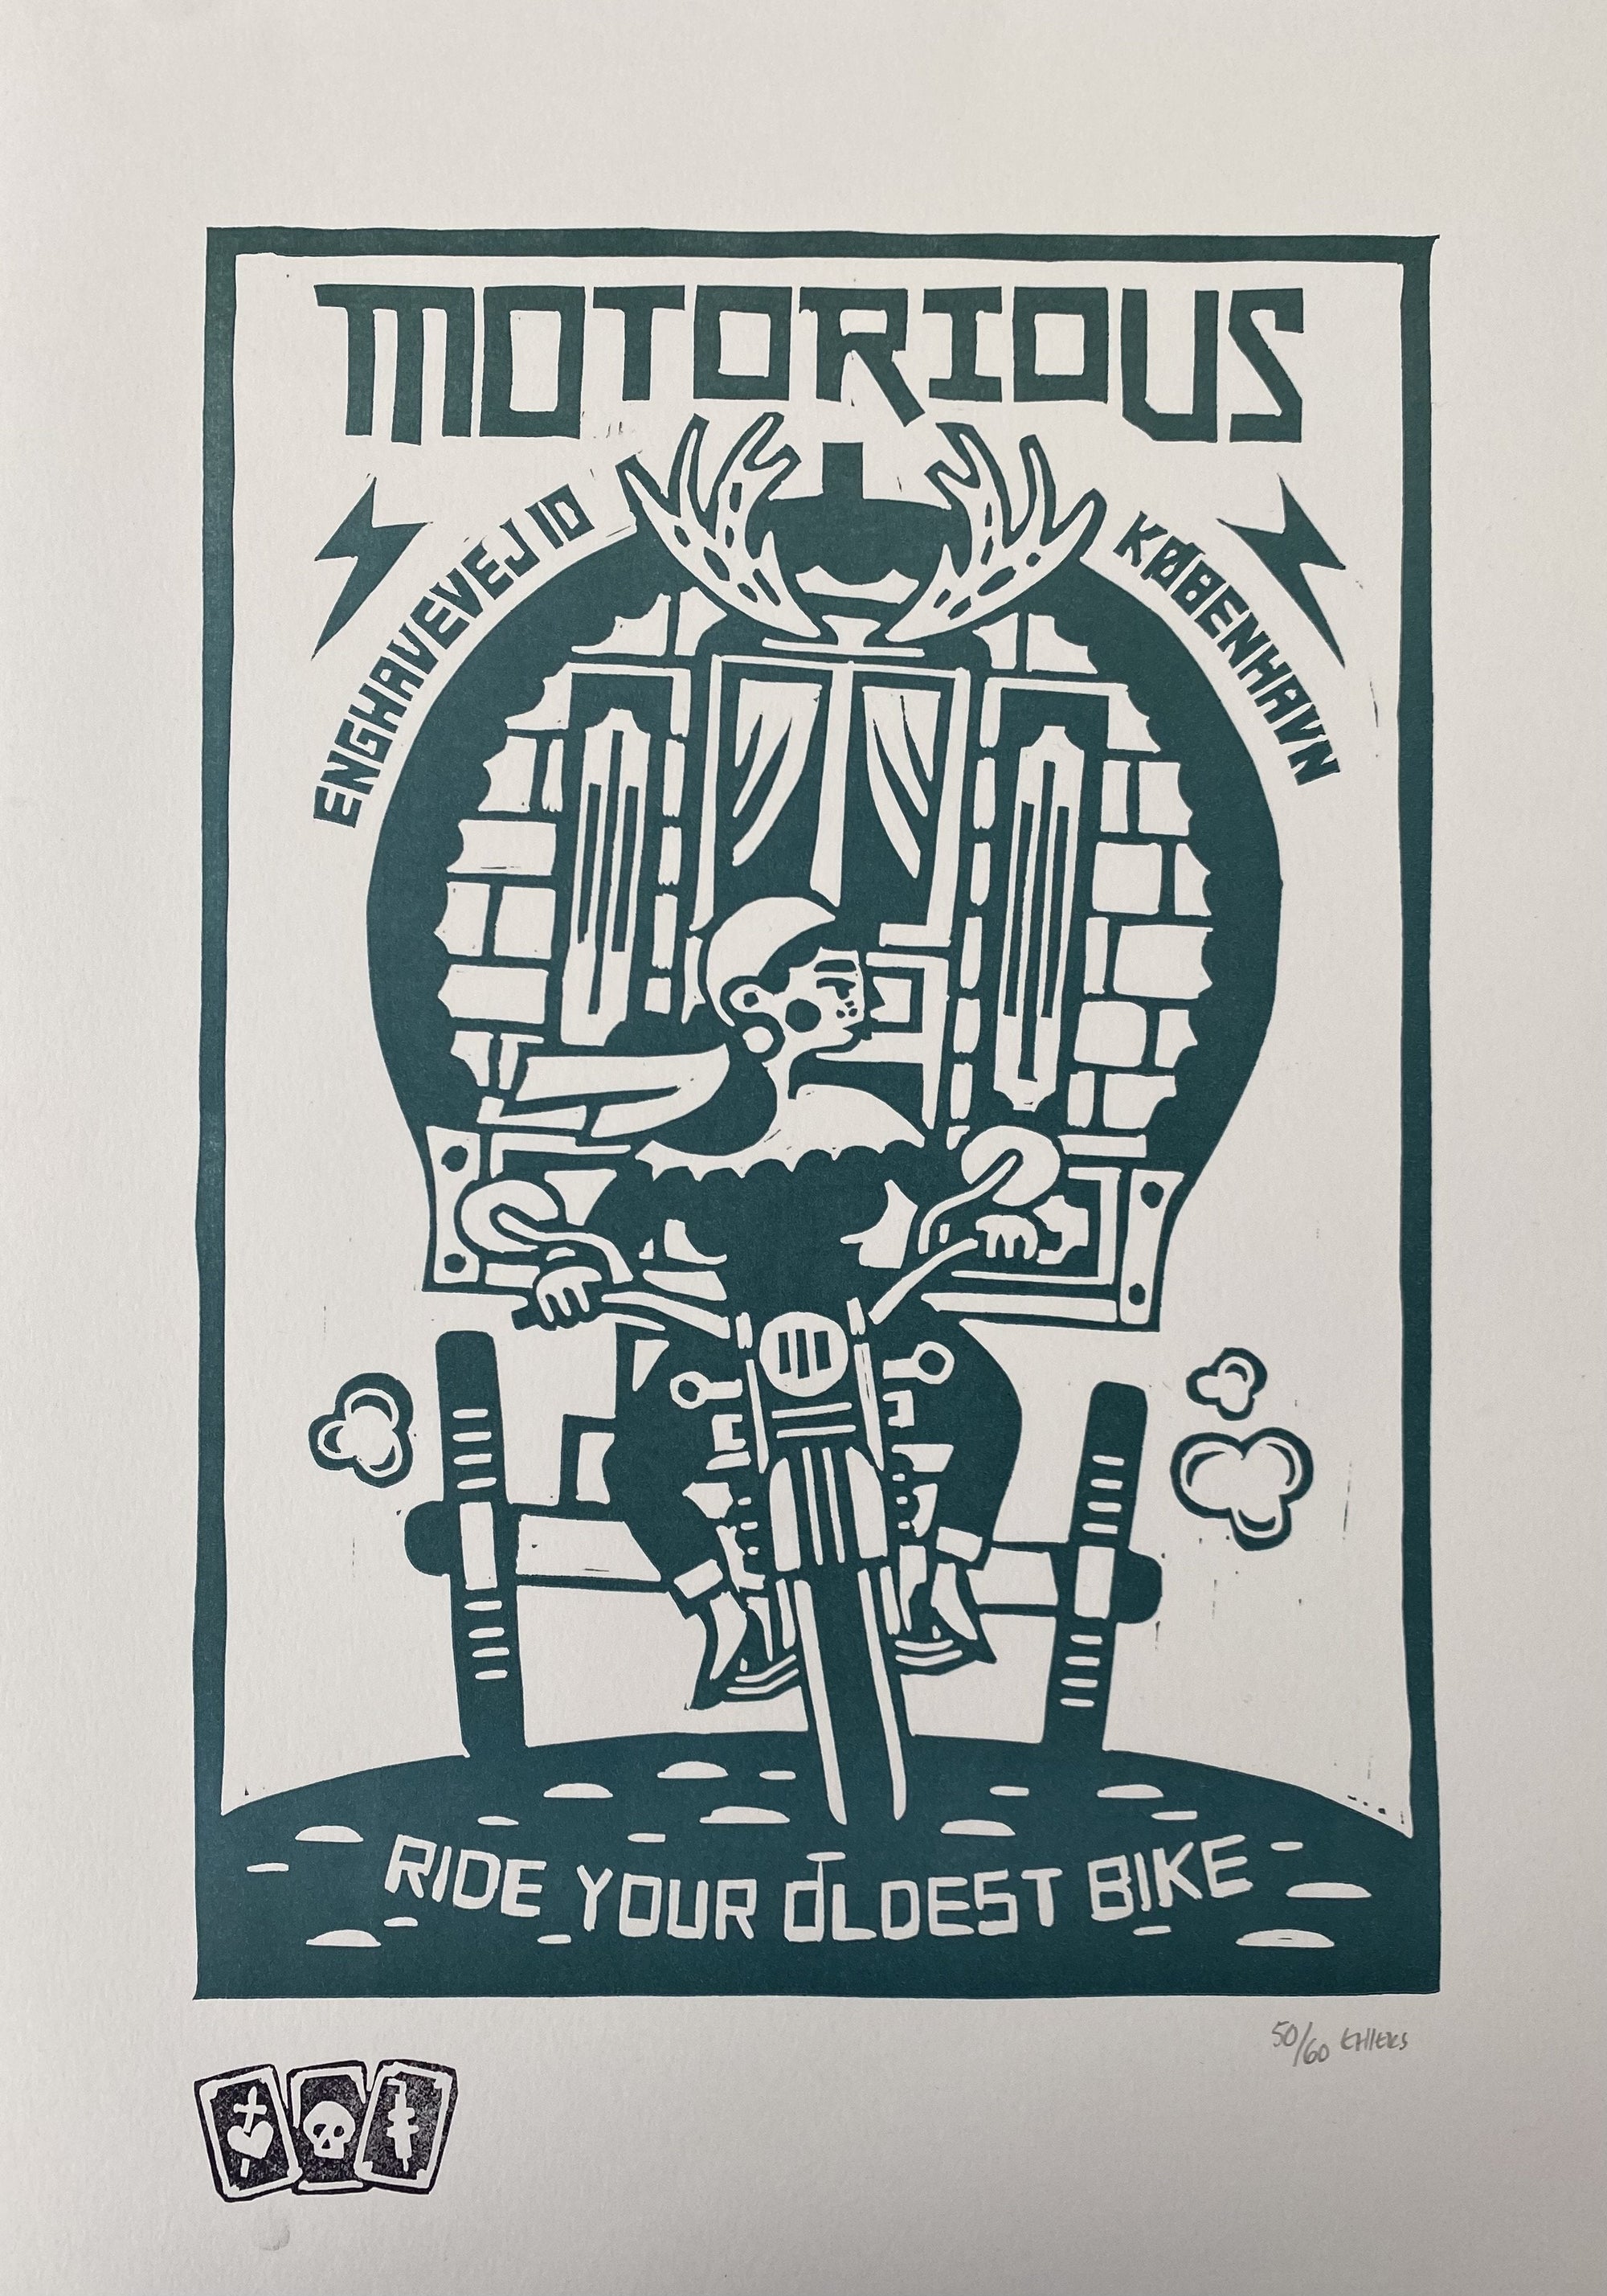 2017 Motorious lino-cut by Mette Ehlers, A3 oversize, Petroleum-Linoleumstryk og Plakater-Motorious Copenhagen-Motorious Copenhagen